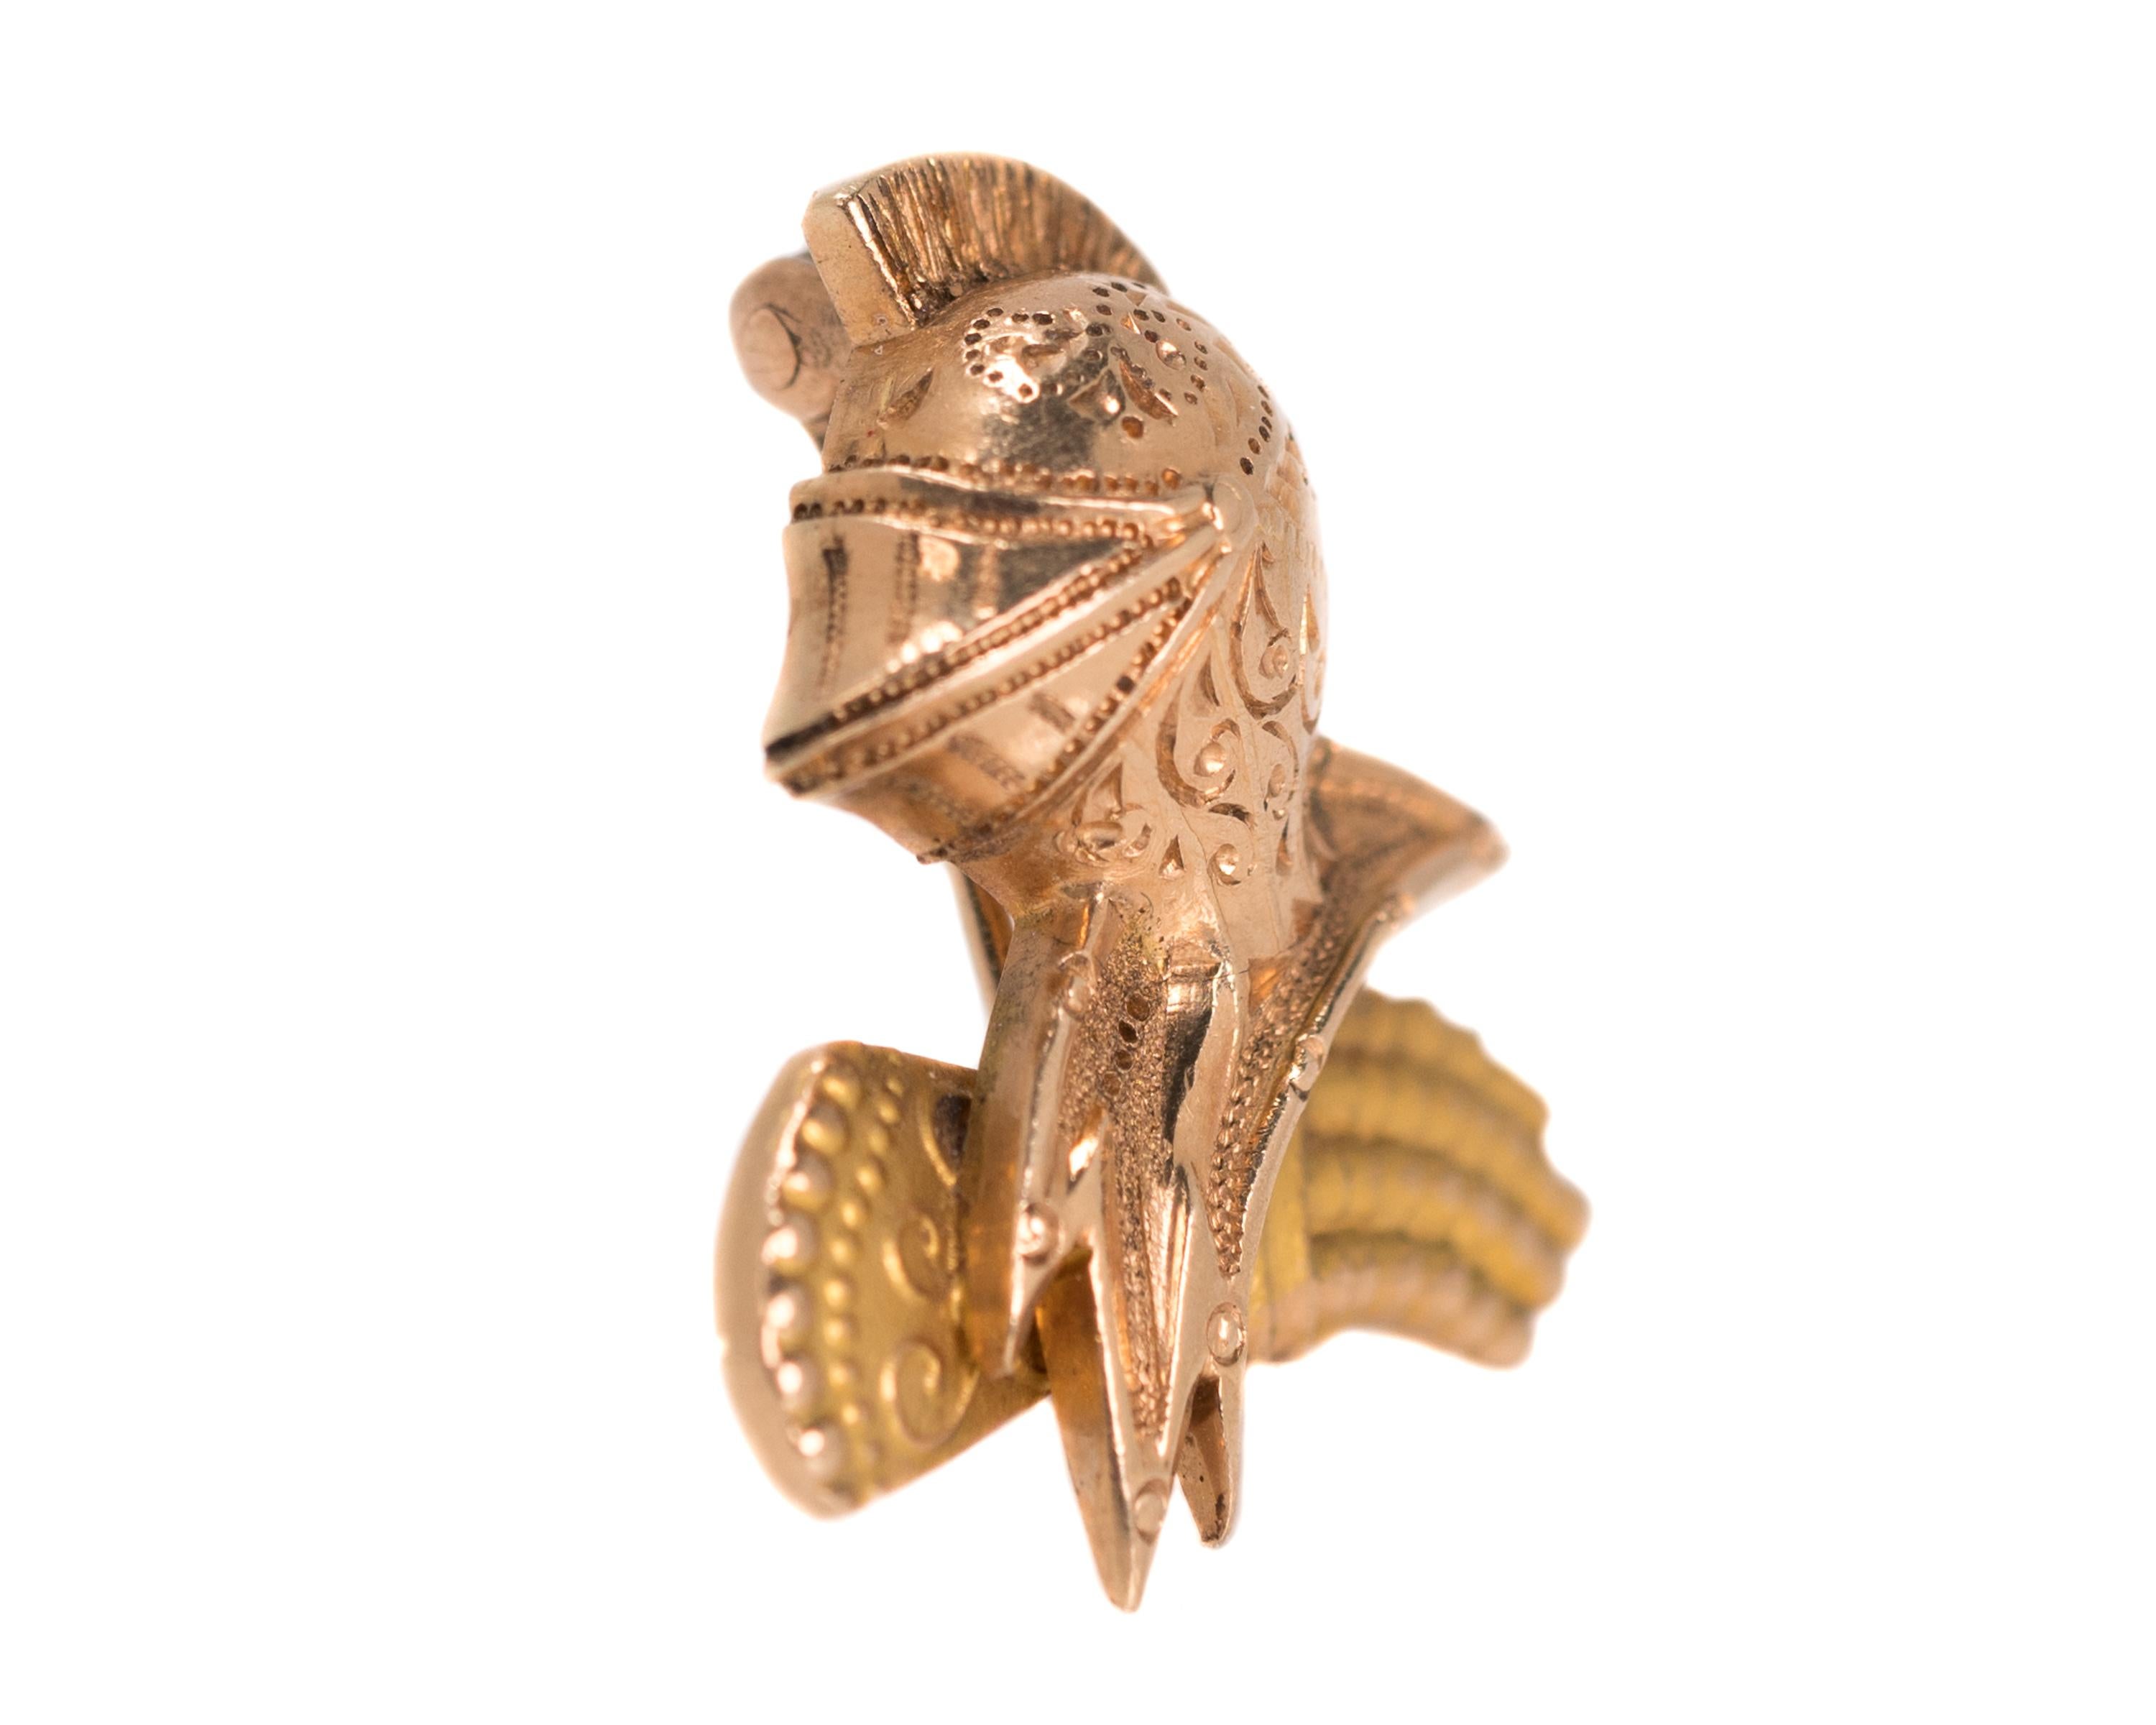 1922 Art Deco Knight's Pin with Helmet, Gorget and Gauntlet - 14 Karat Yellow Gold, Rose Gold

Features: 
Medieval Knight's Helmet with Gorget and Gauntlet 
Gorget layered over the Gauntlet
Very finely detailed design
Scrollwork and dotwork